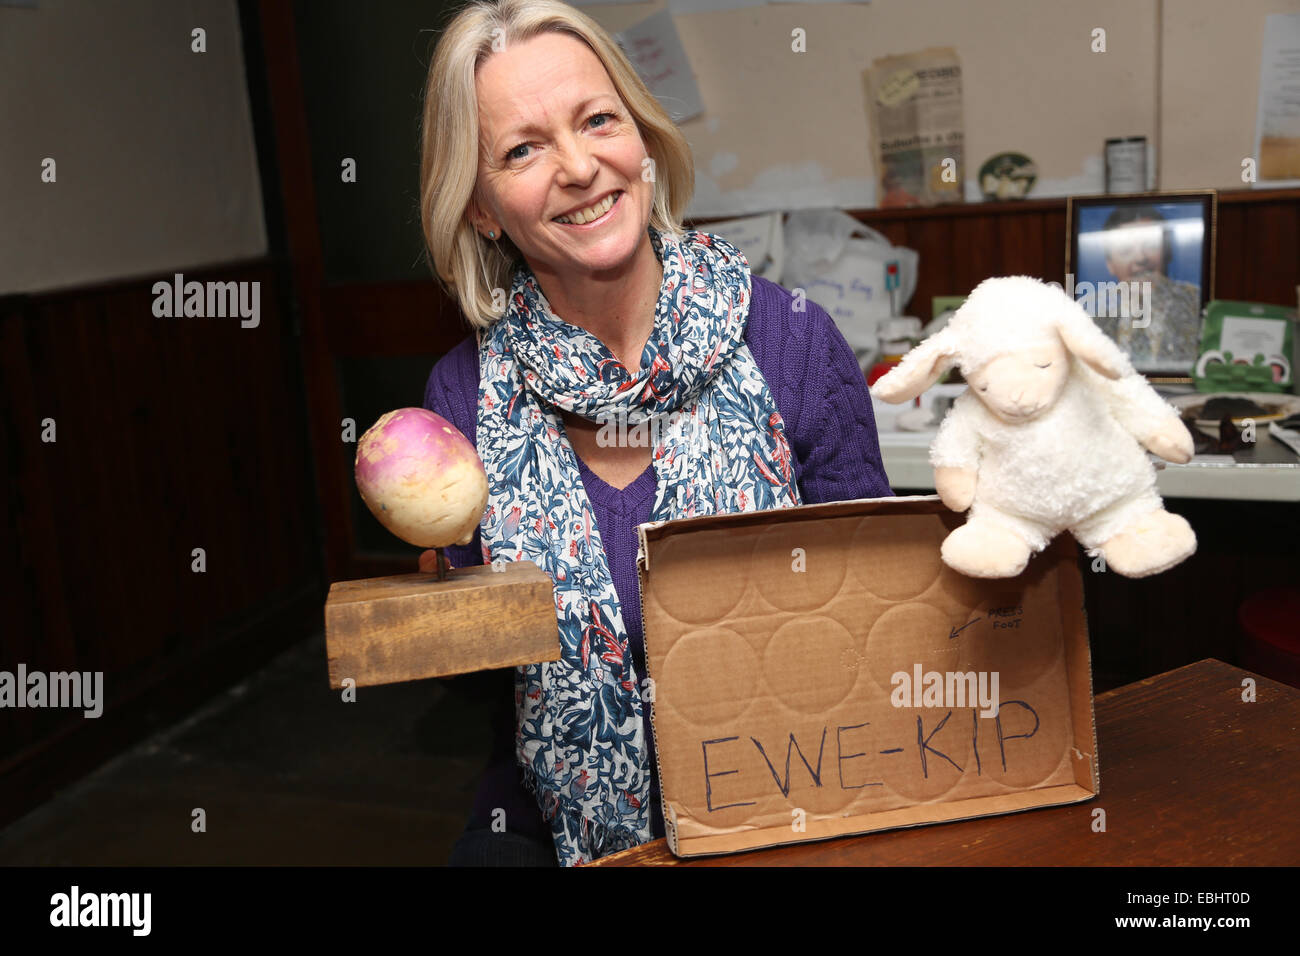 Wedmore, Somerset. 1st Dec, 2014. Drunken Shepherd with Ewe-Kip,  her winning entry of the 2014 Turnip Awards, held at the New Inn, Wedmore, Somerset. 1st December 2014. The competition mocks the prestigious Turner Prize for contemporary art Credit:  TW Photo Images/Alamy Live News Stock Photo